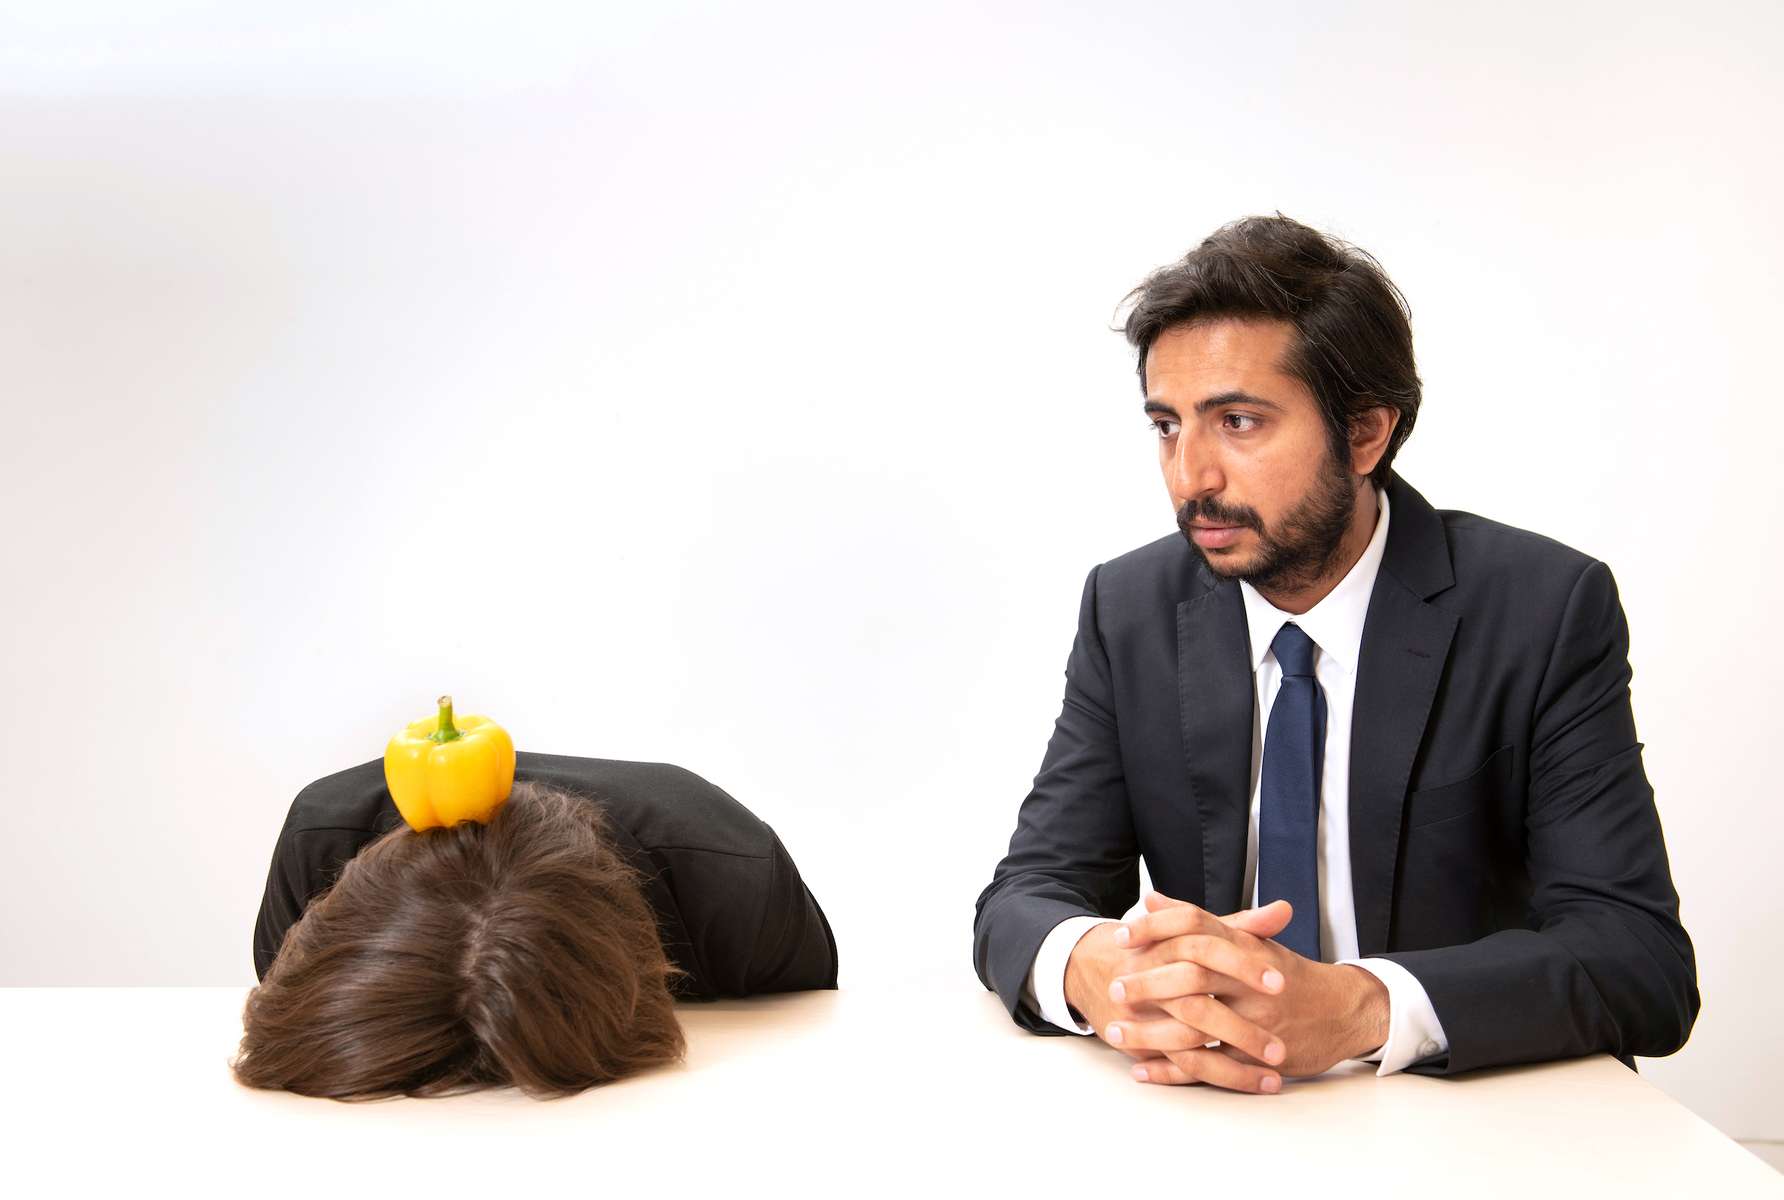 Laure Stockley and Hasan Waliany. Photoshoot for Obstacle, absurd corporate scenes at the Hassell offices, London, UK